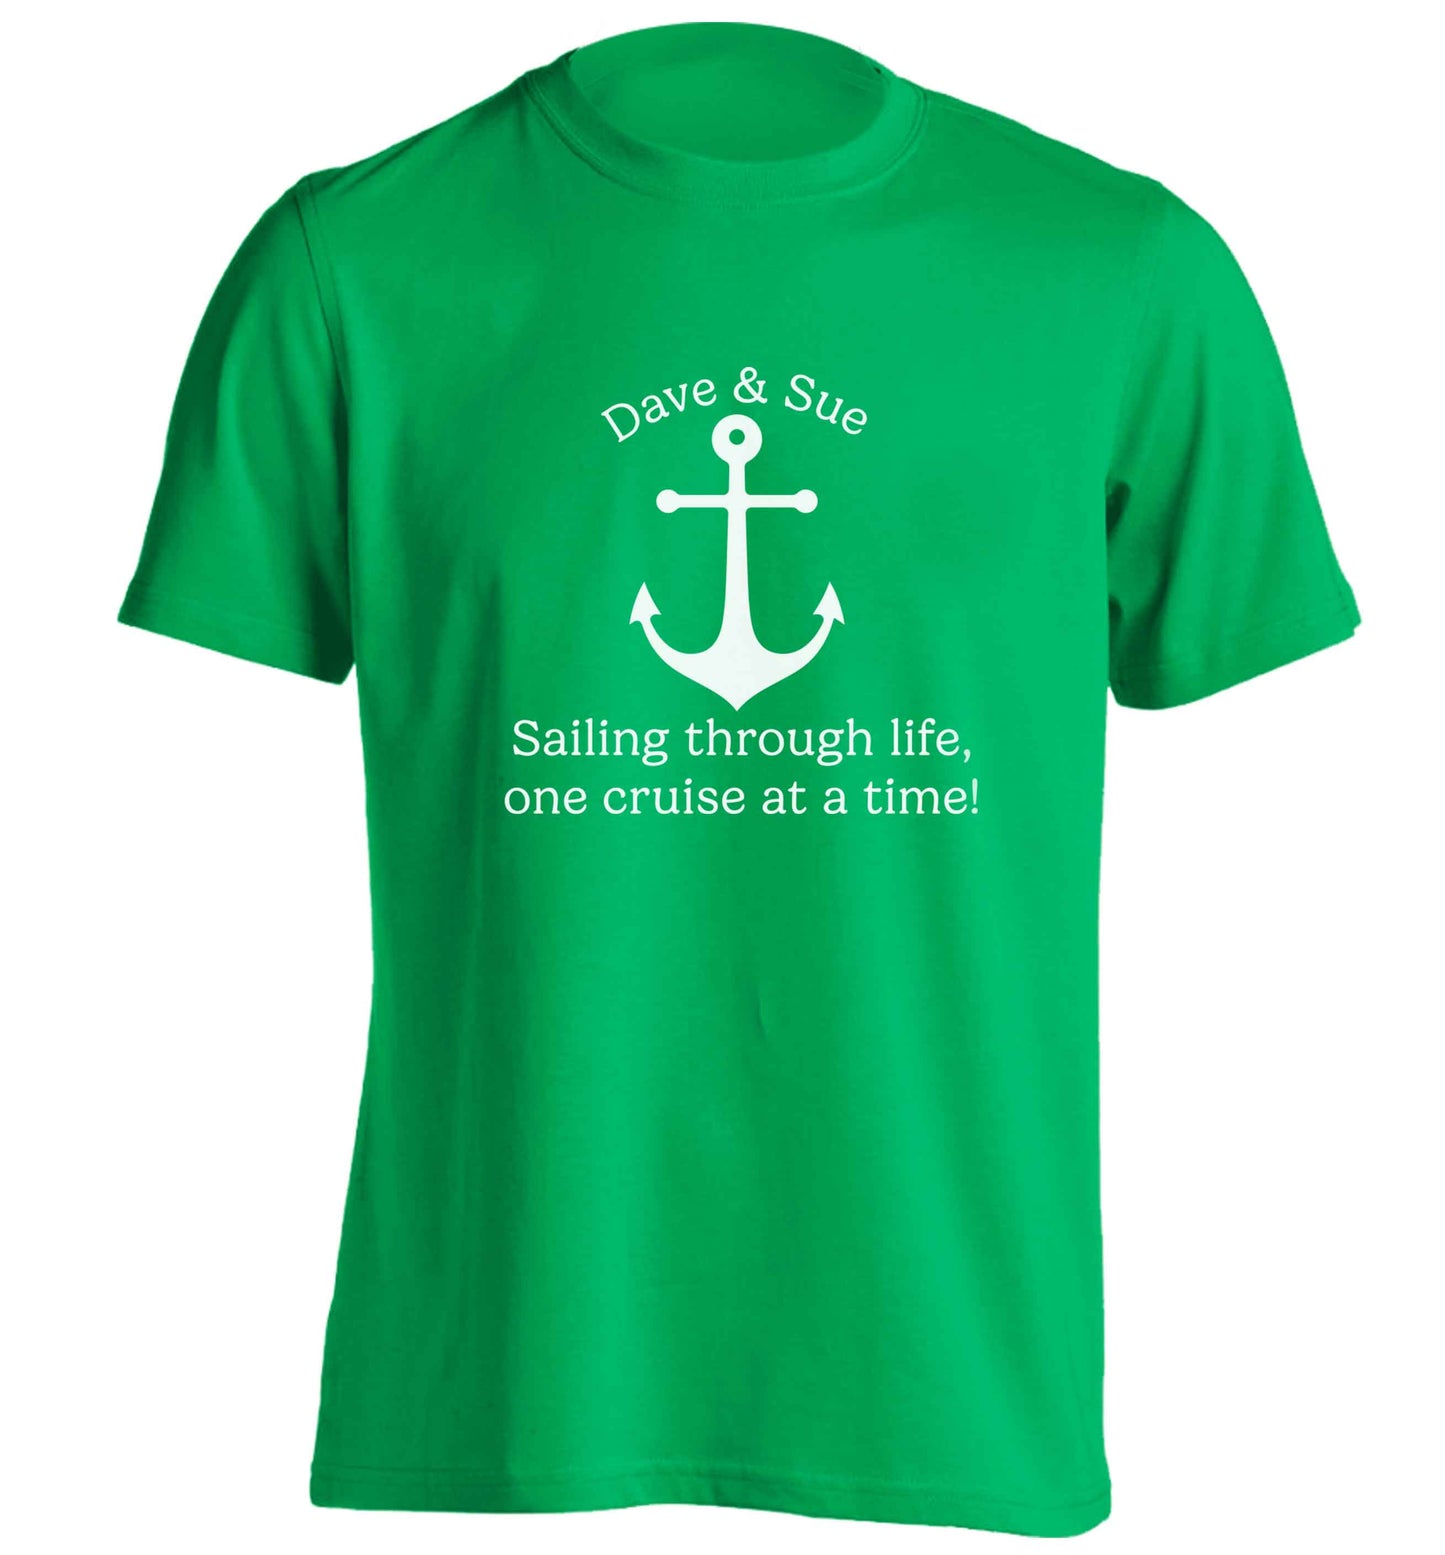 Sailing through life one cruise at a time - personalised adults unisex green Tshirt 2XL